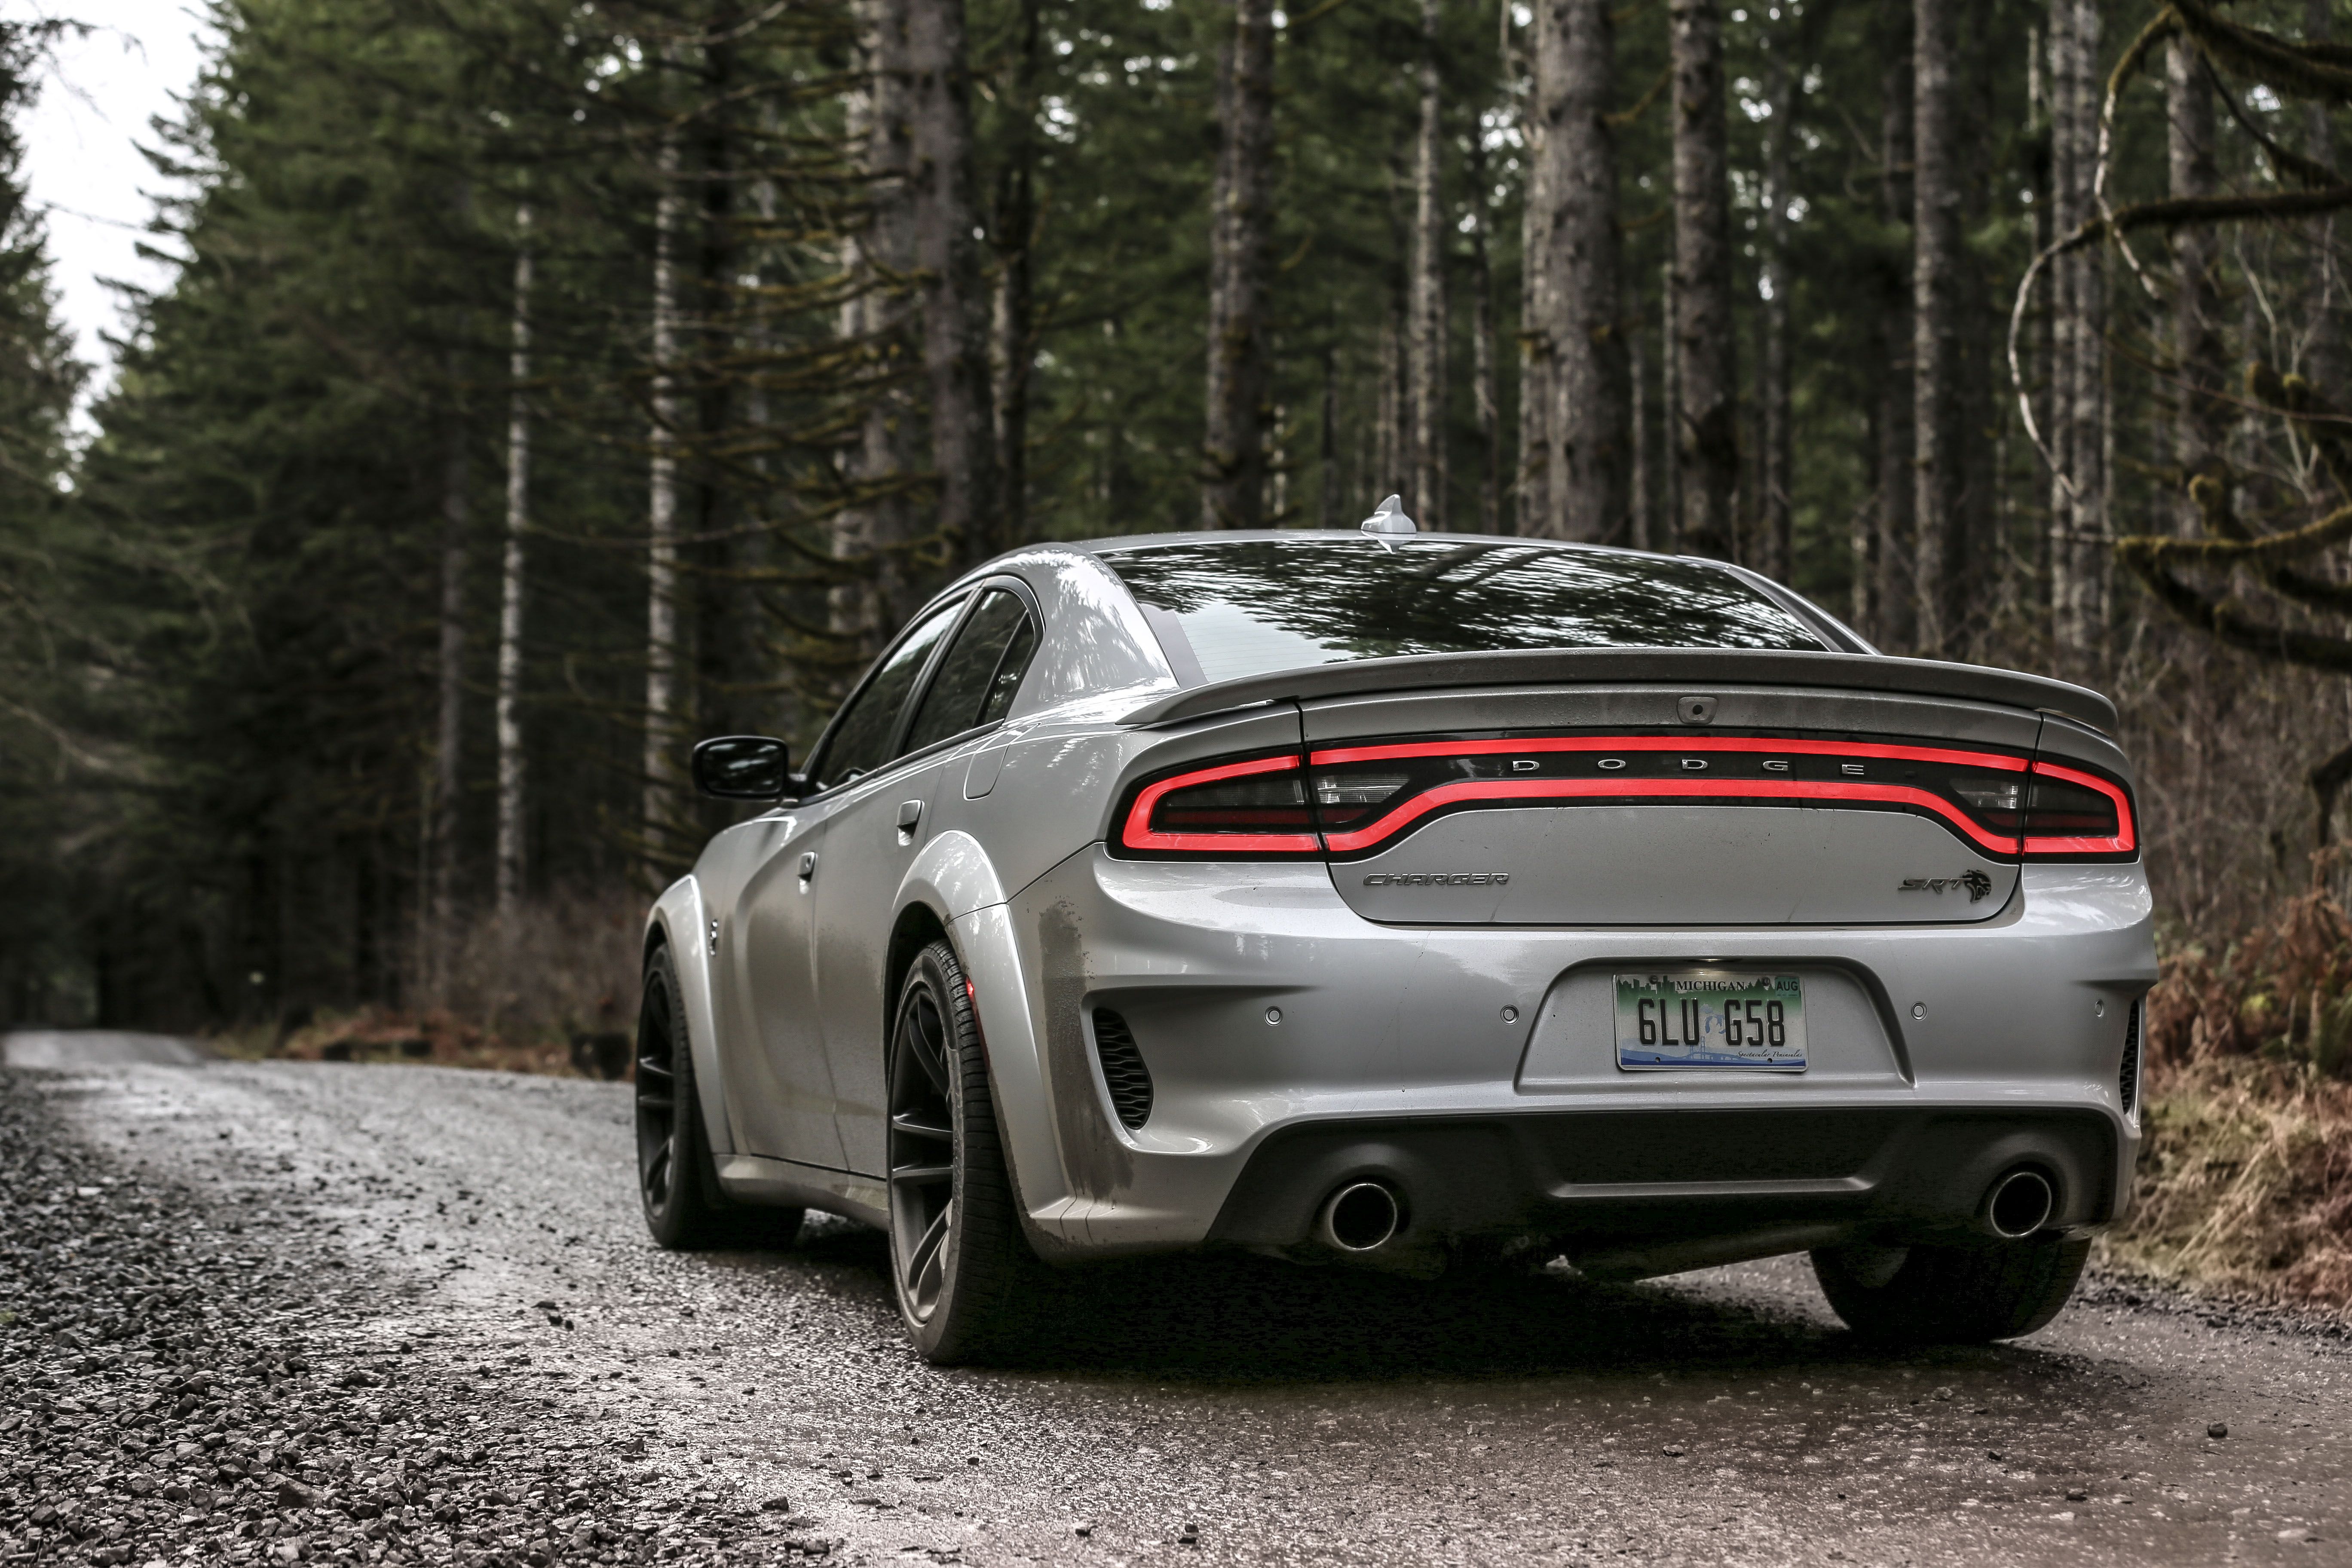 Dodge Charger Hellcat Widebody Road Test Adventure Review